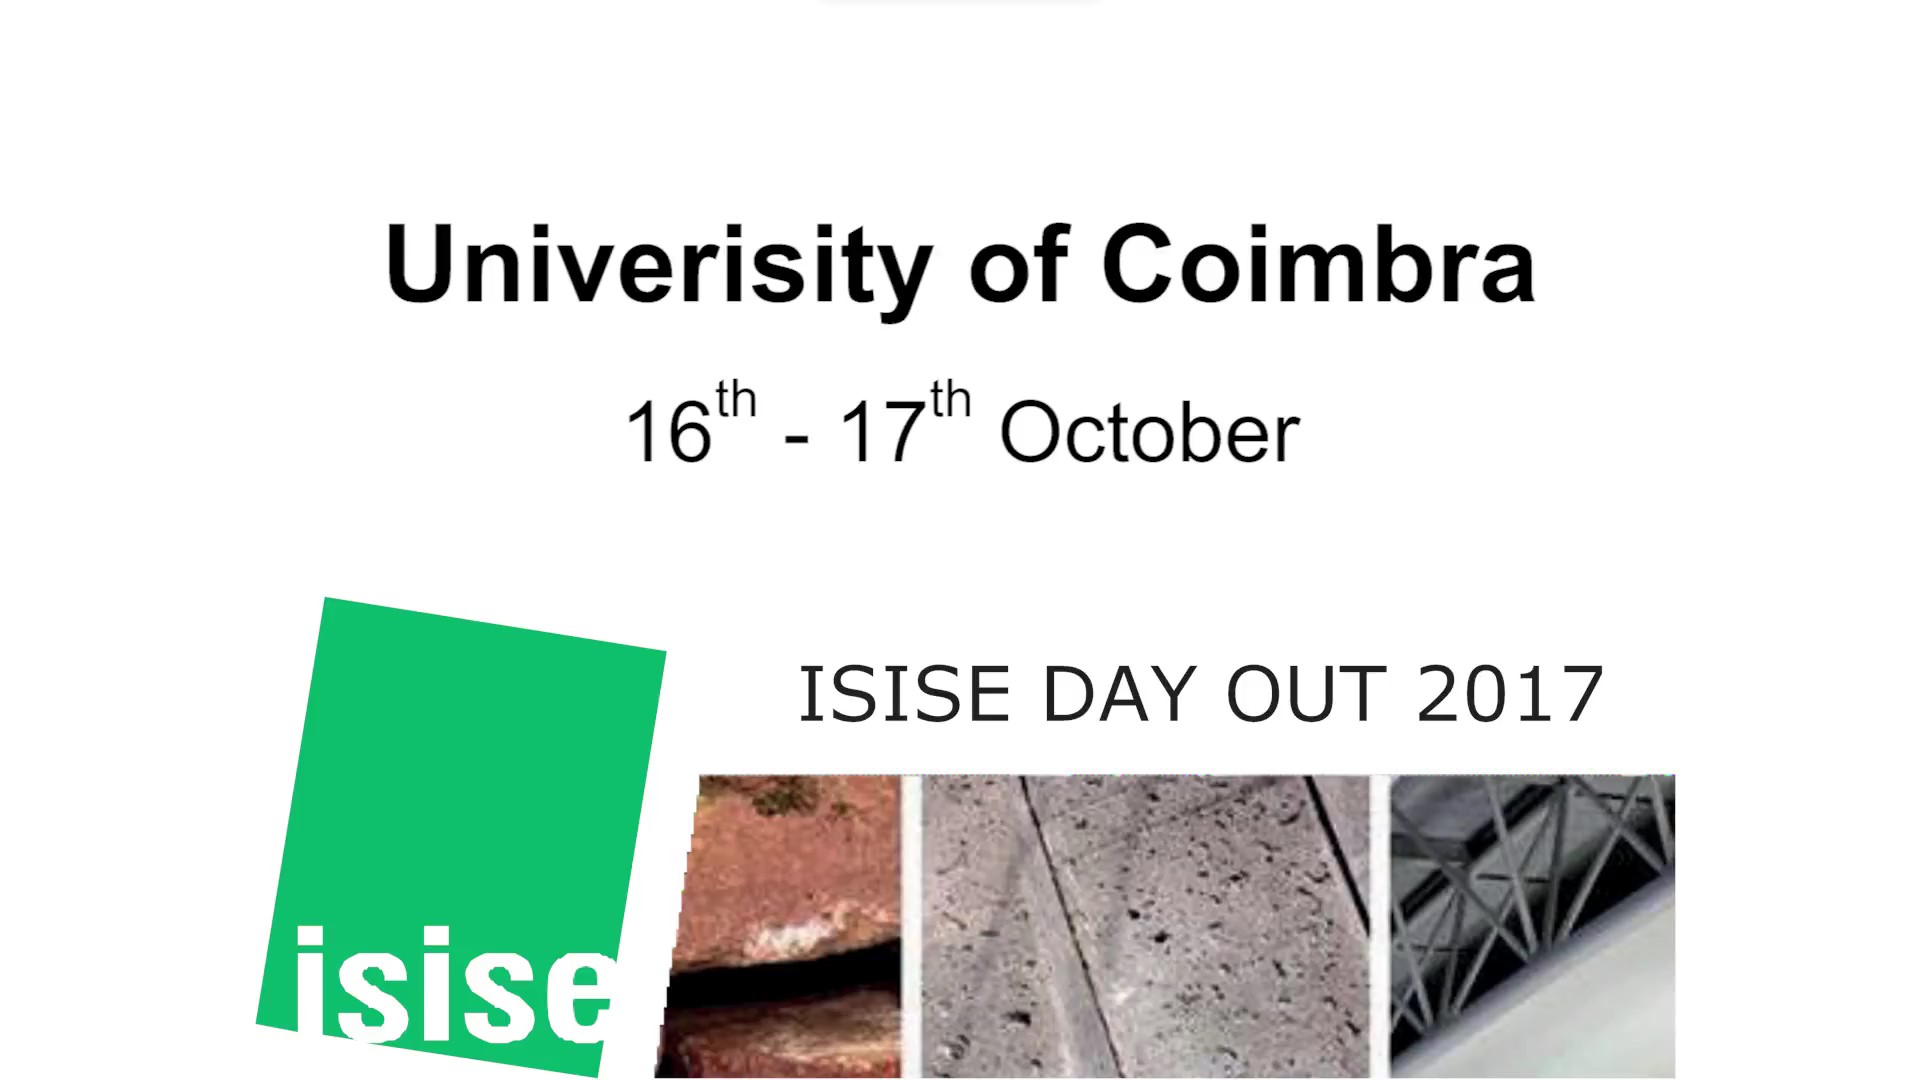 ISISE DAY-OUT 2017 - Long video